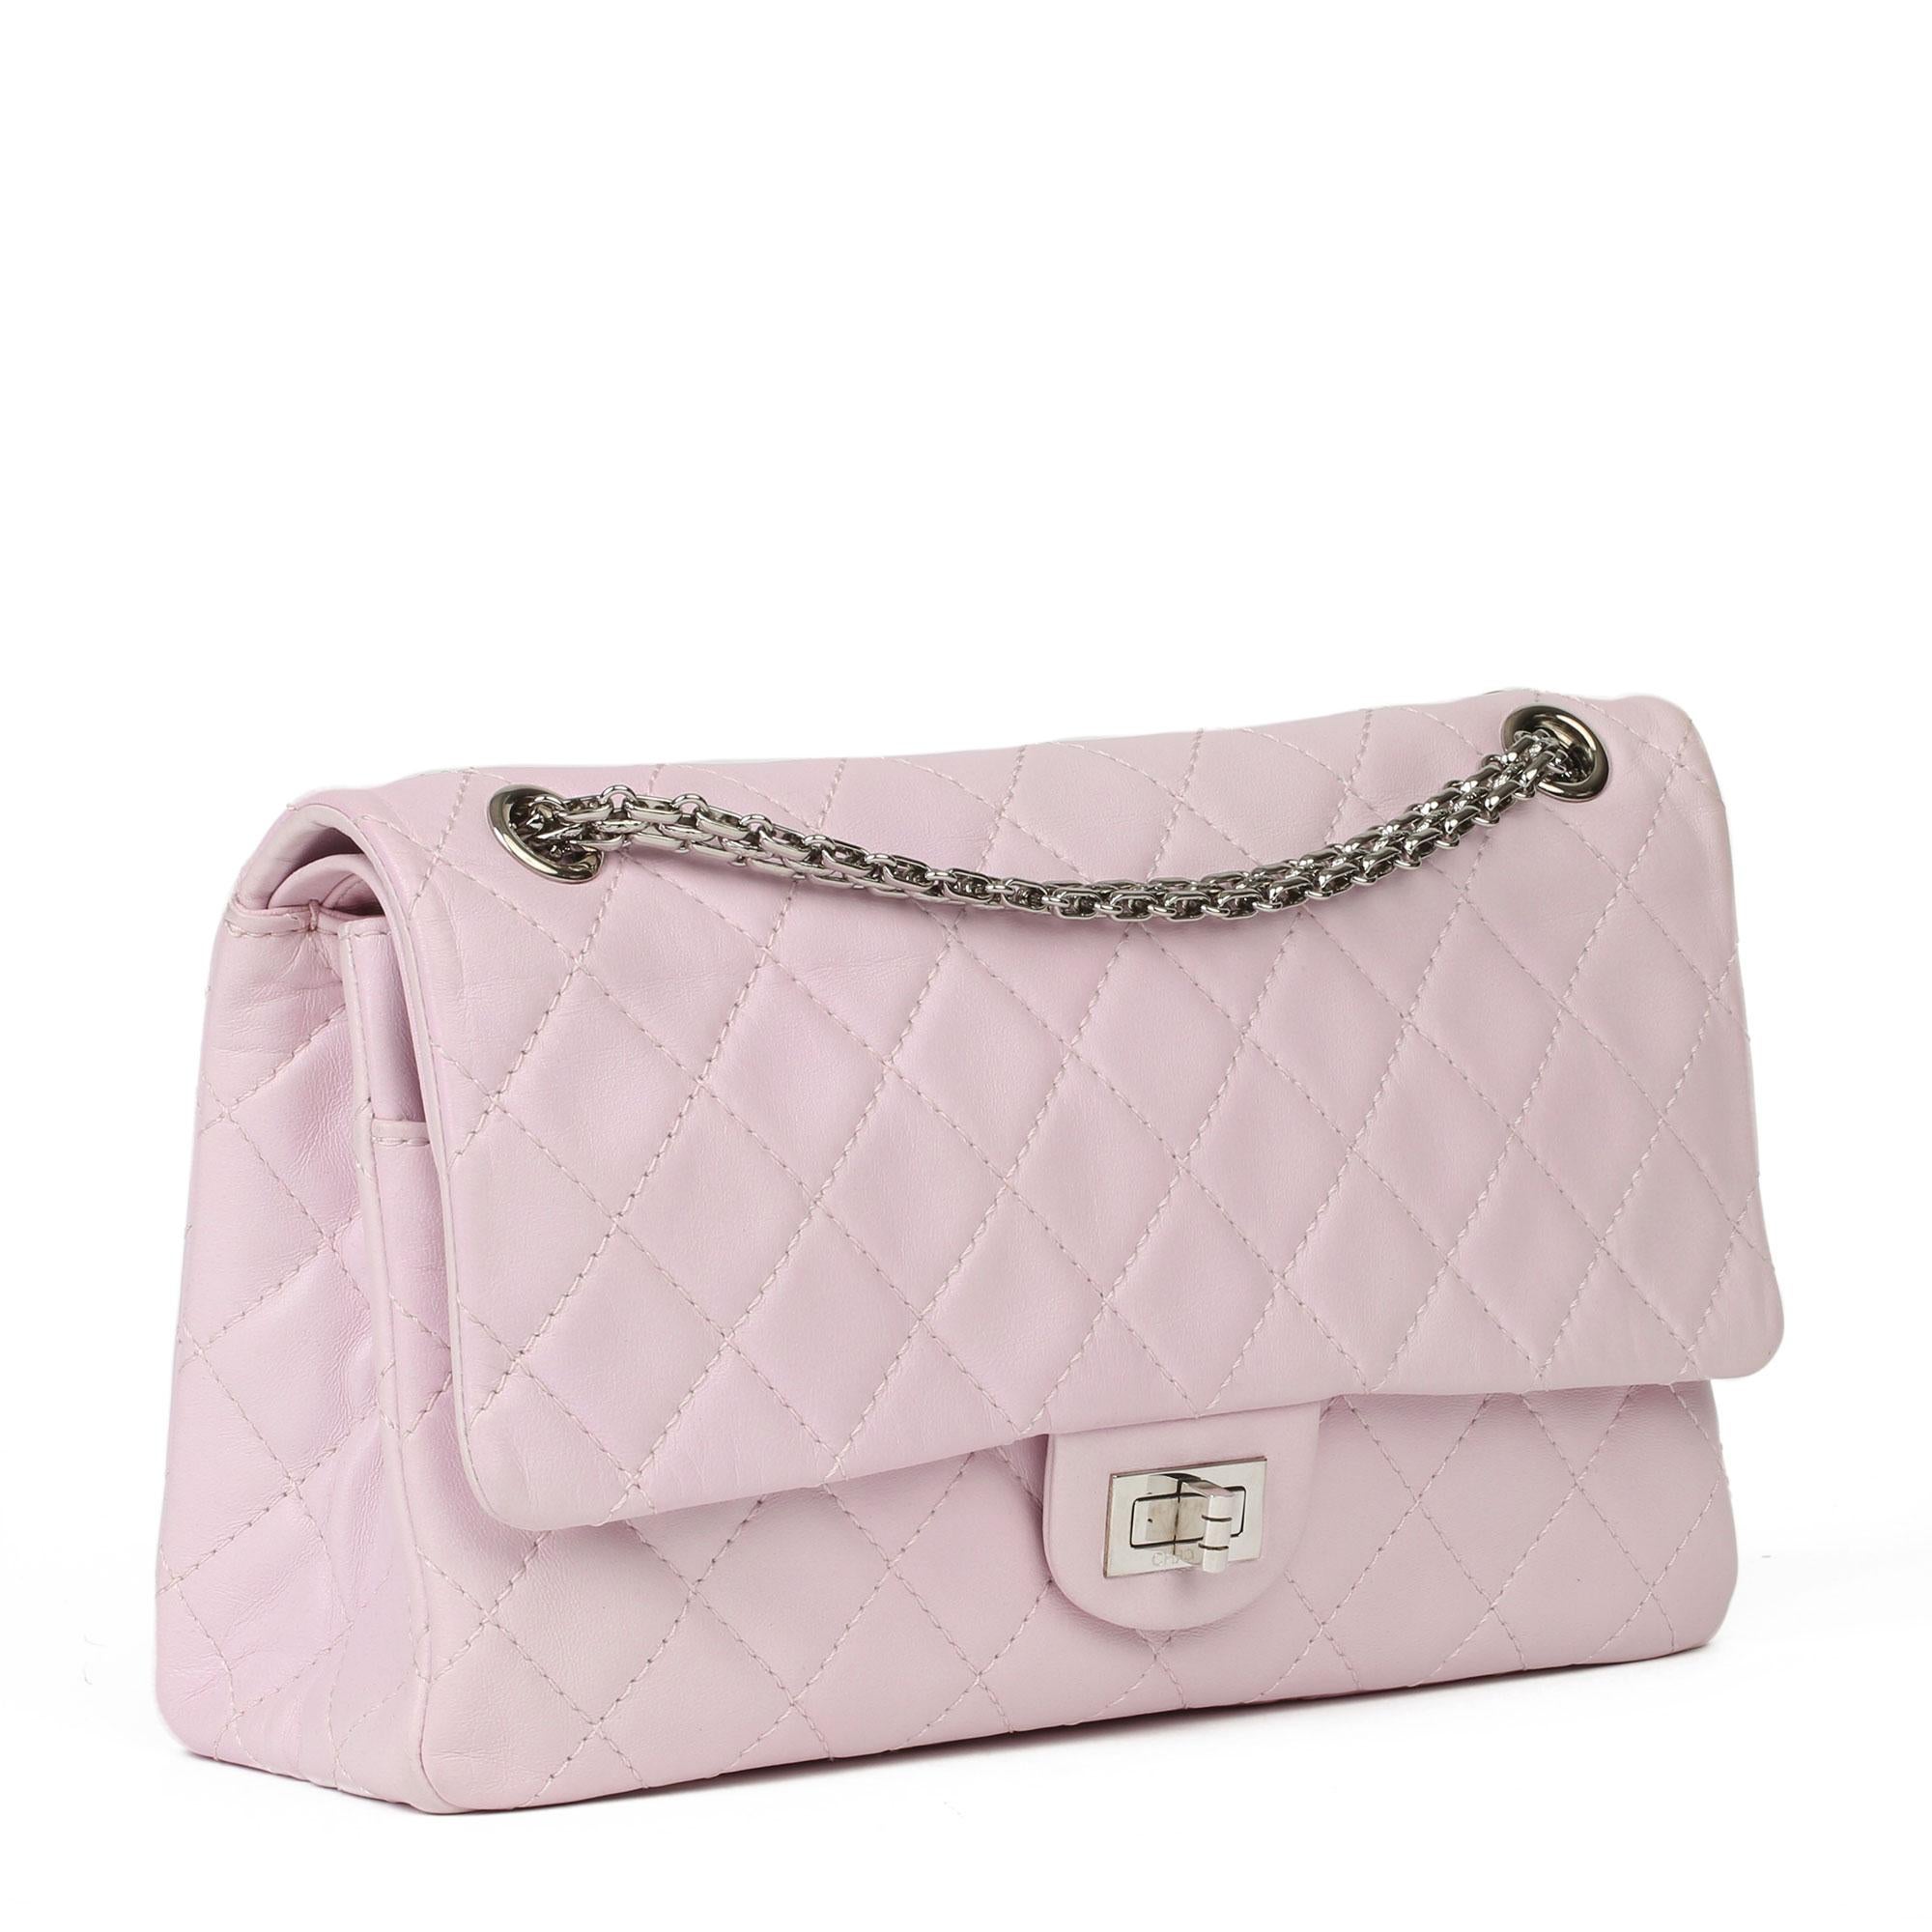 CHANEL
Sakura Pink Quilted Lambskin 2.55 Reissue 226 Flap Bag

Serial Number: 12874722
Age (Circa): 2009
Accompanied By: Chanel Dust Bag, Box, Authenticity Card, Care Booklet, Protective Felt
Authenticity Details: Authenticity Card, Serial Sticker